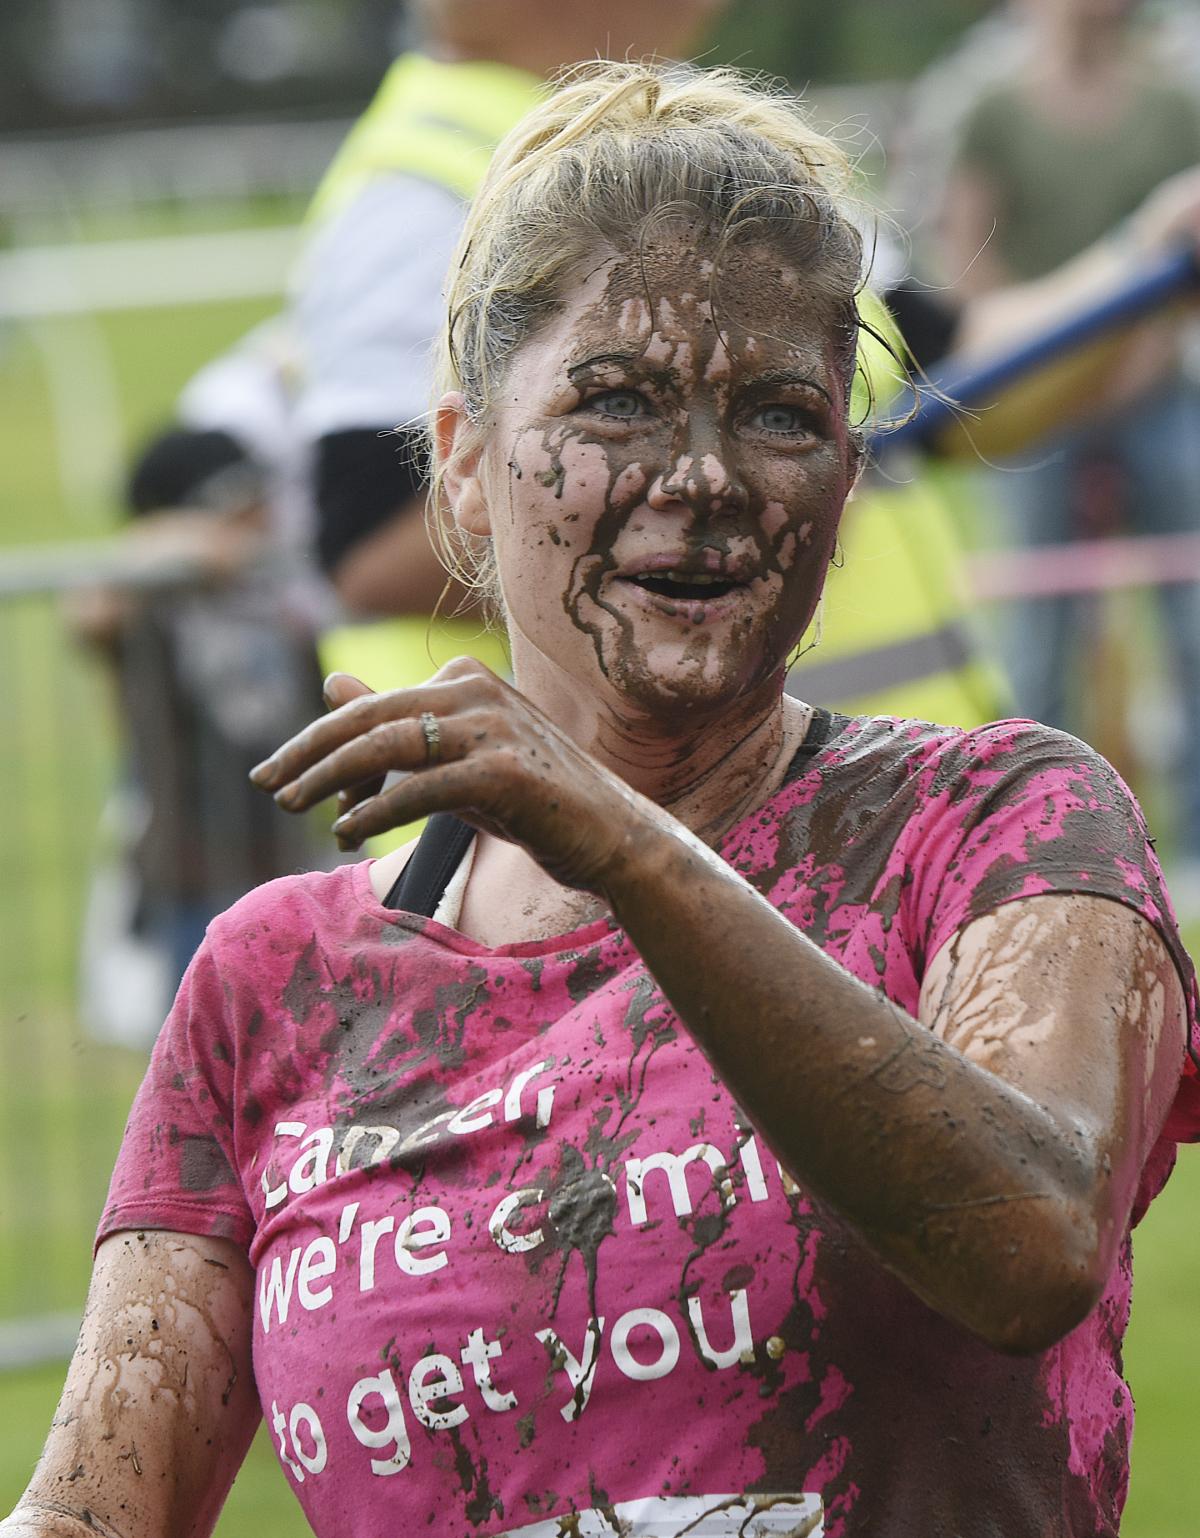 Race for Life 2016